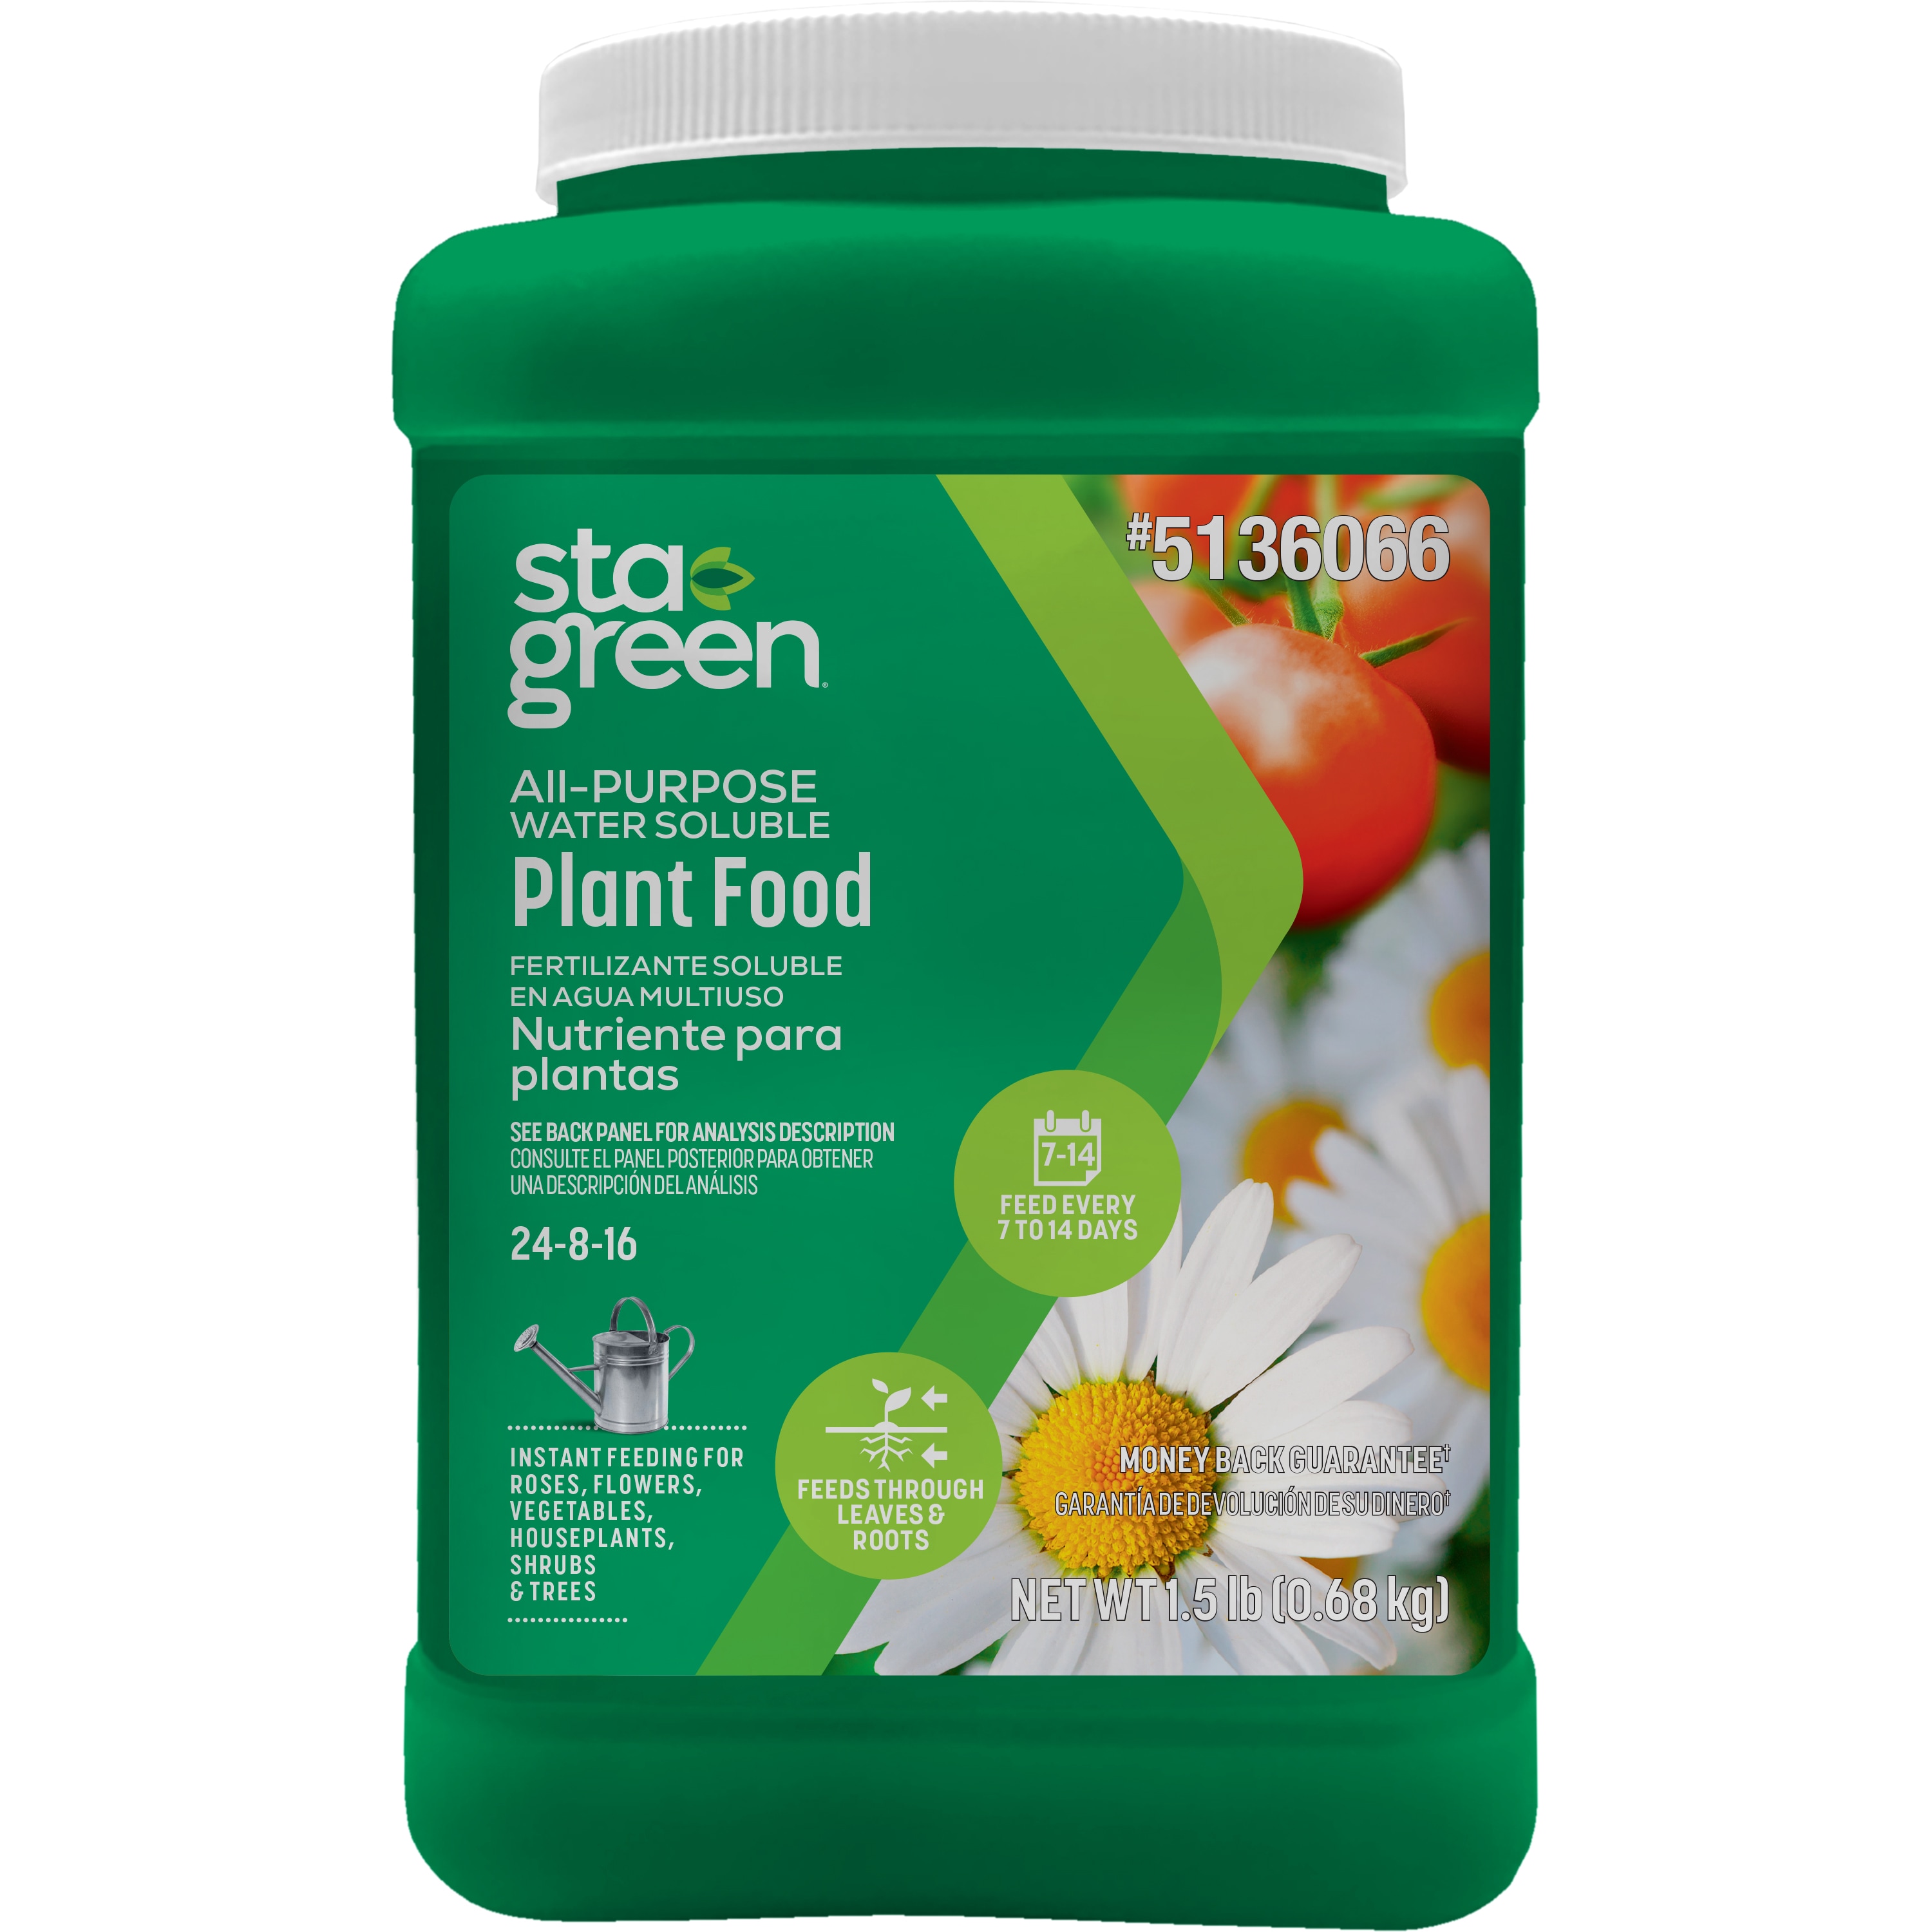 sta-green-water-soluble-1-5-lb-all-purpose-food-in-the-plant-food